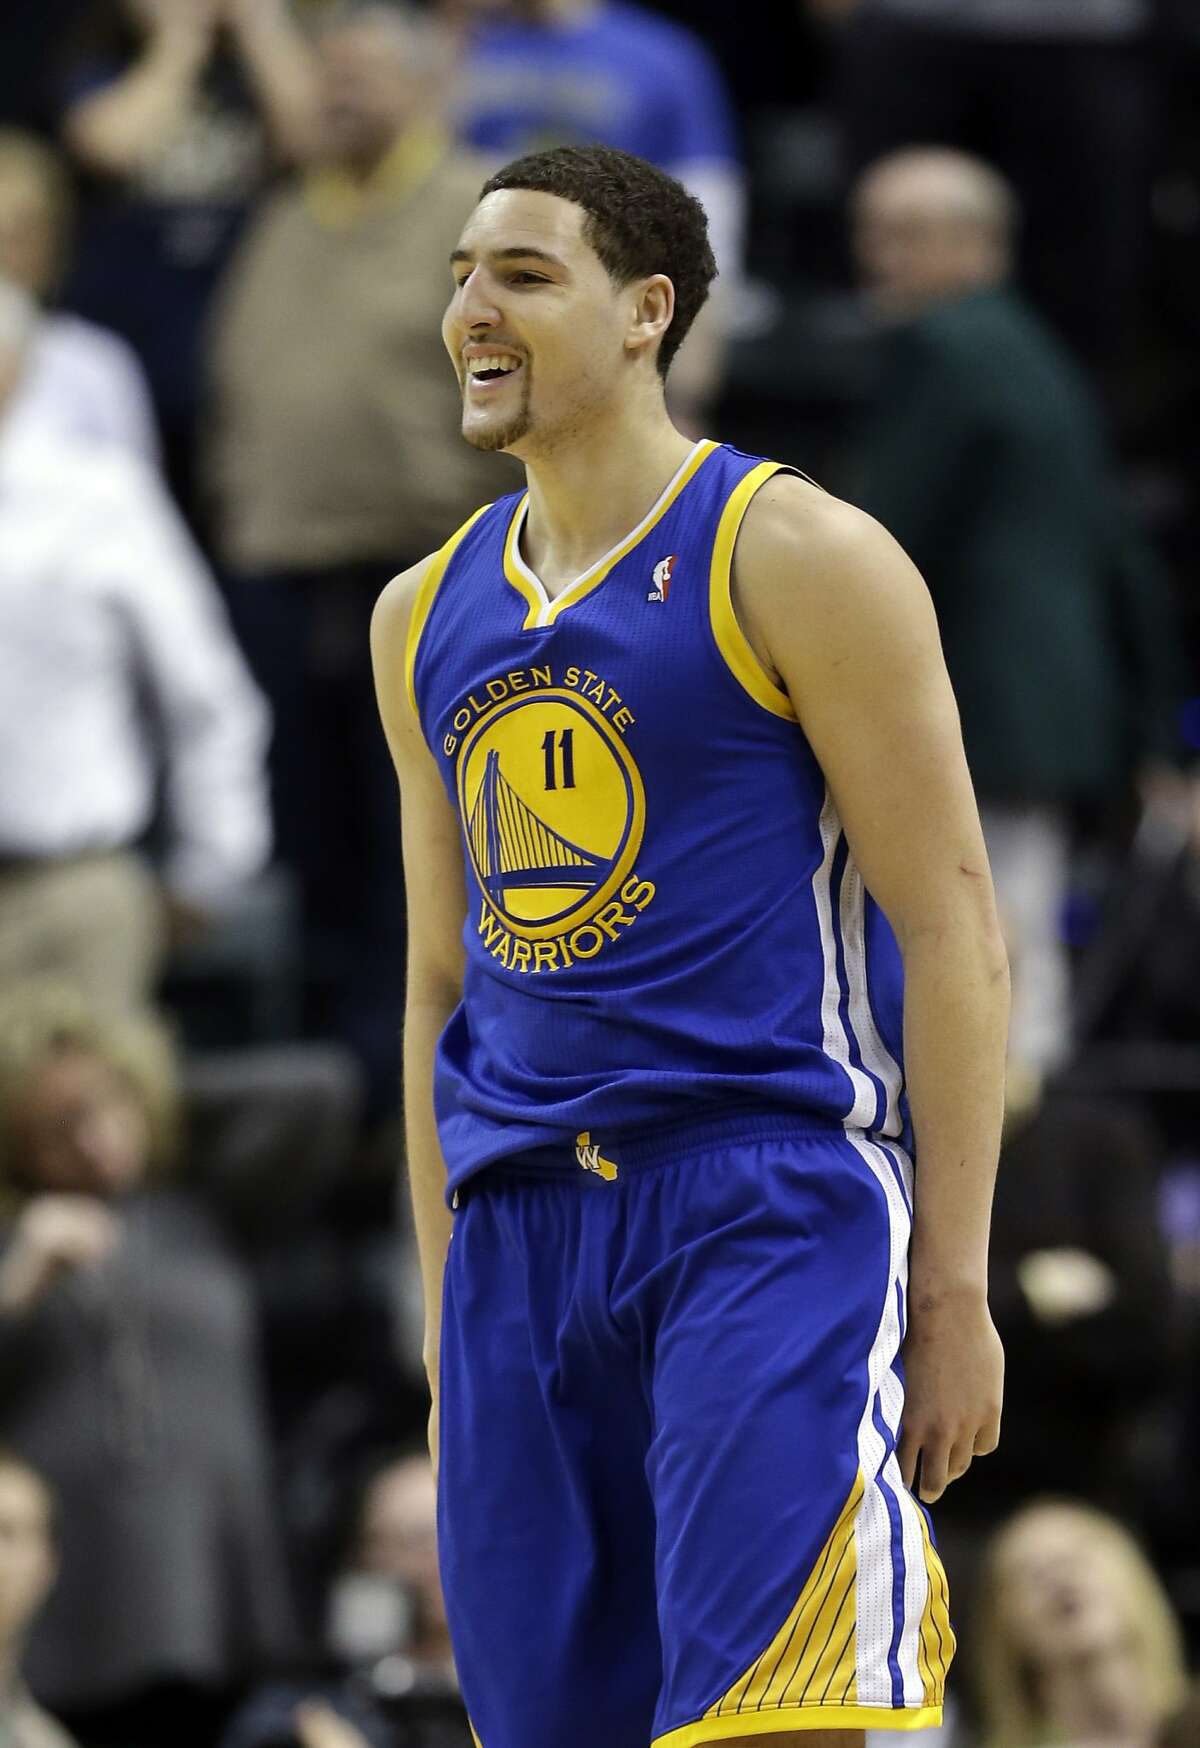 Golden State Warriors' Klay Thompson smiles after putting up the game winning shot late in the second half of an NBA basketball game against the Indiana Pacers Tuesday, March 4, 2014, in Indianapolis. Golden State defeated Indiana 98-96. (AP Photo/Darron Cummings)